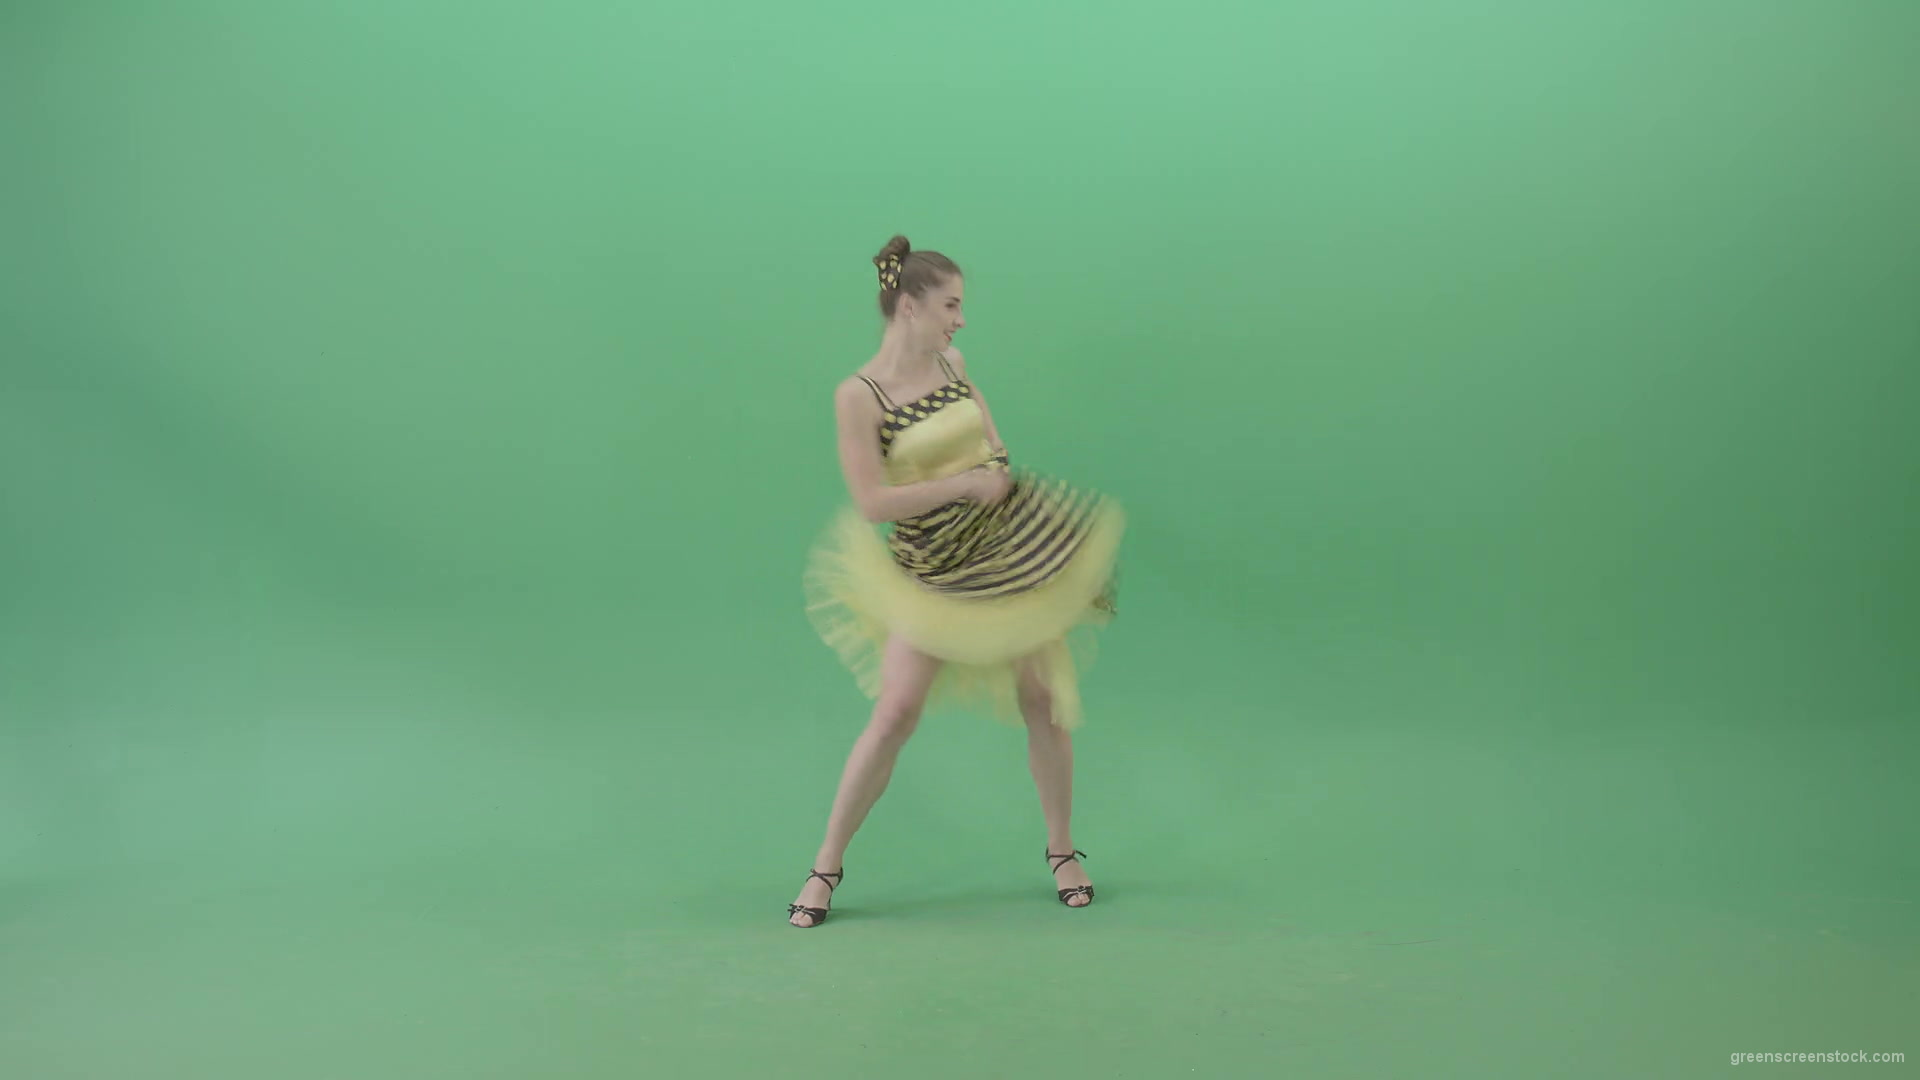 Happy-Woman-dancing-Rock-and-Roll-Jazz-Swing-Boogie-woogie-isolated-on-Green-Screen-4K-Video-Footage-1920_005 Green Screen Stock